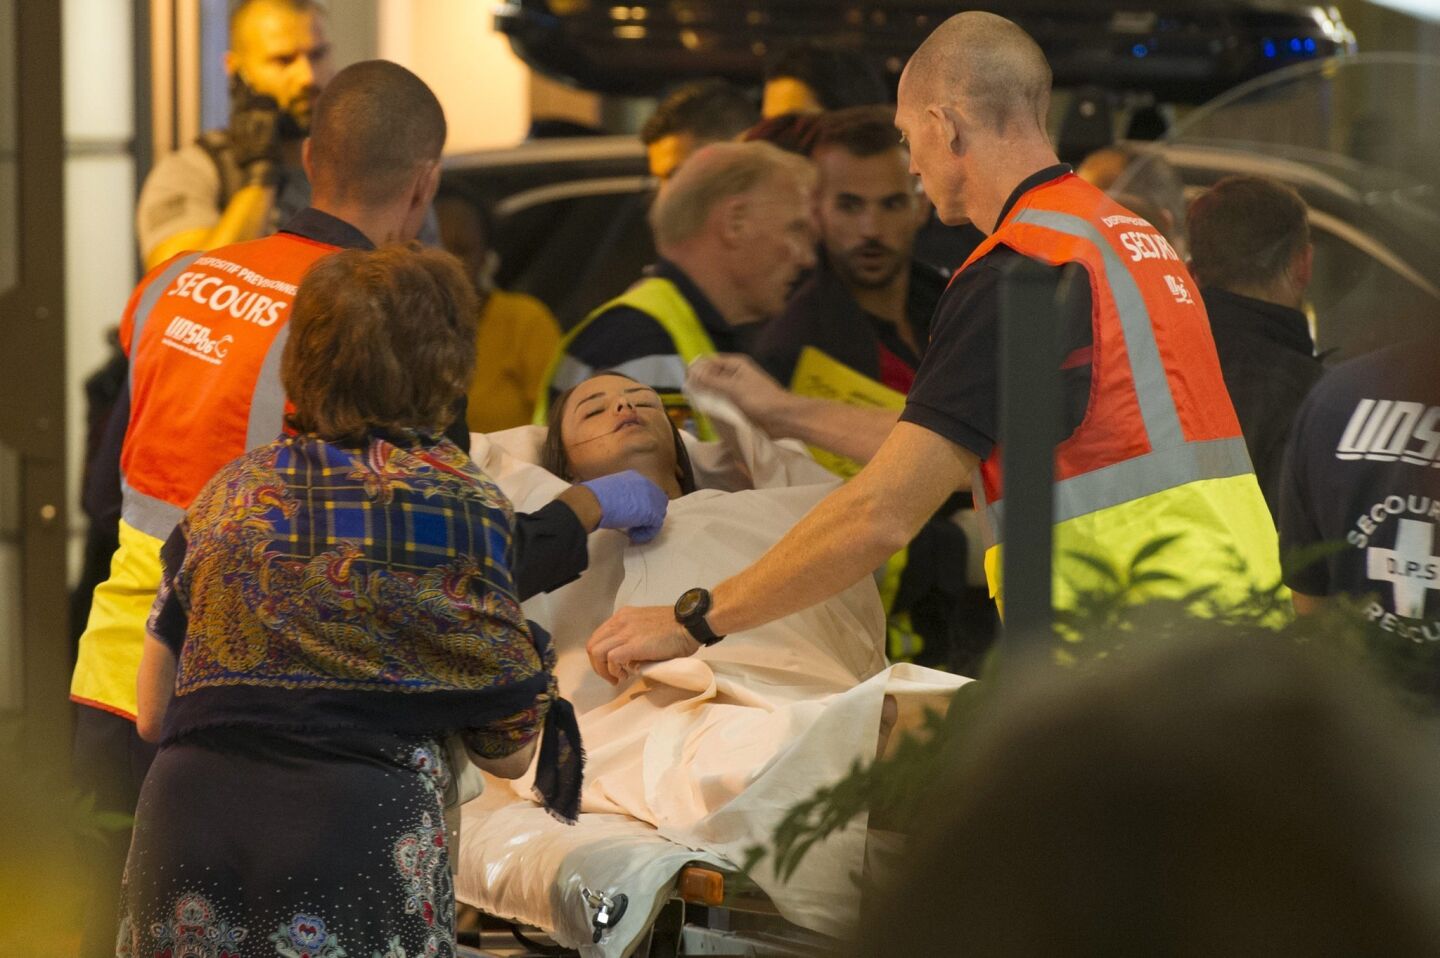 Emergency workers tend to a woman injured in the truck attack.